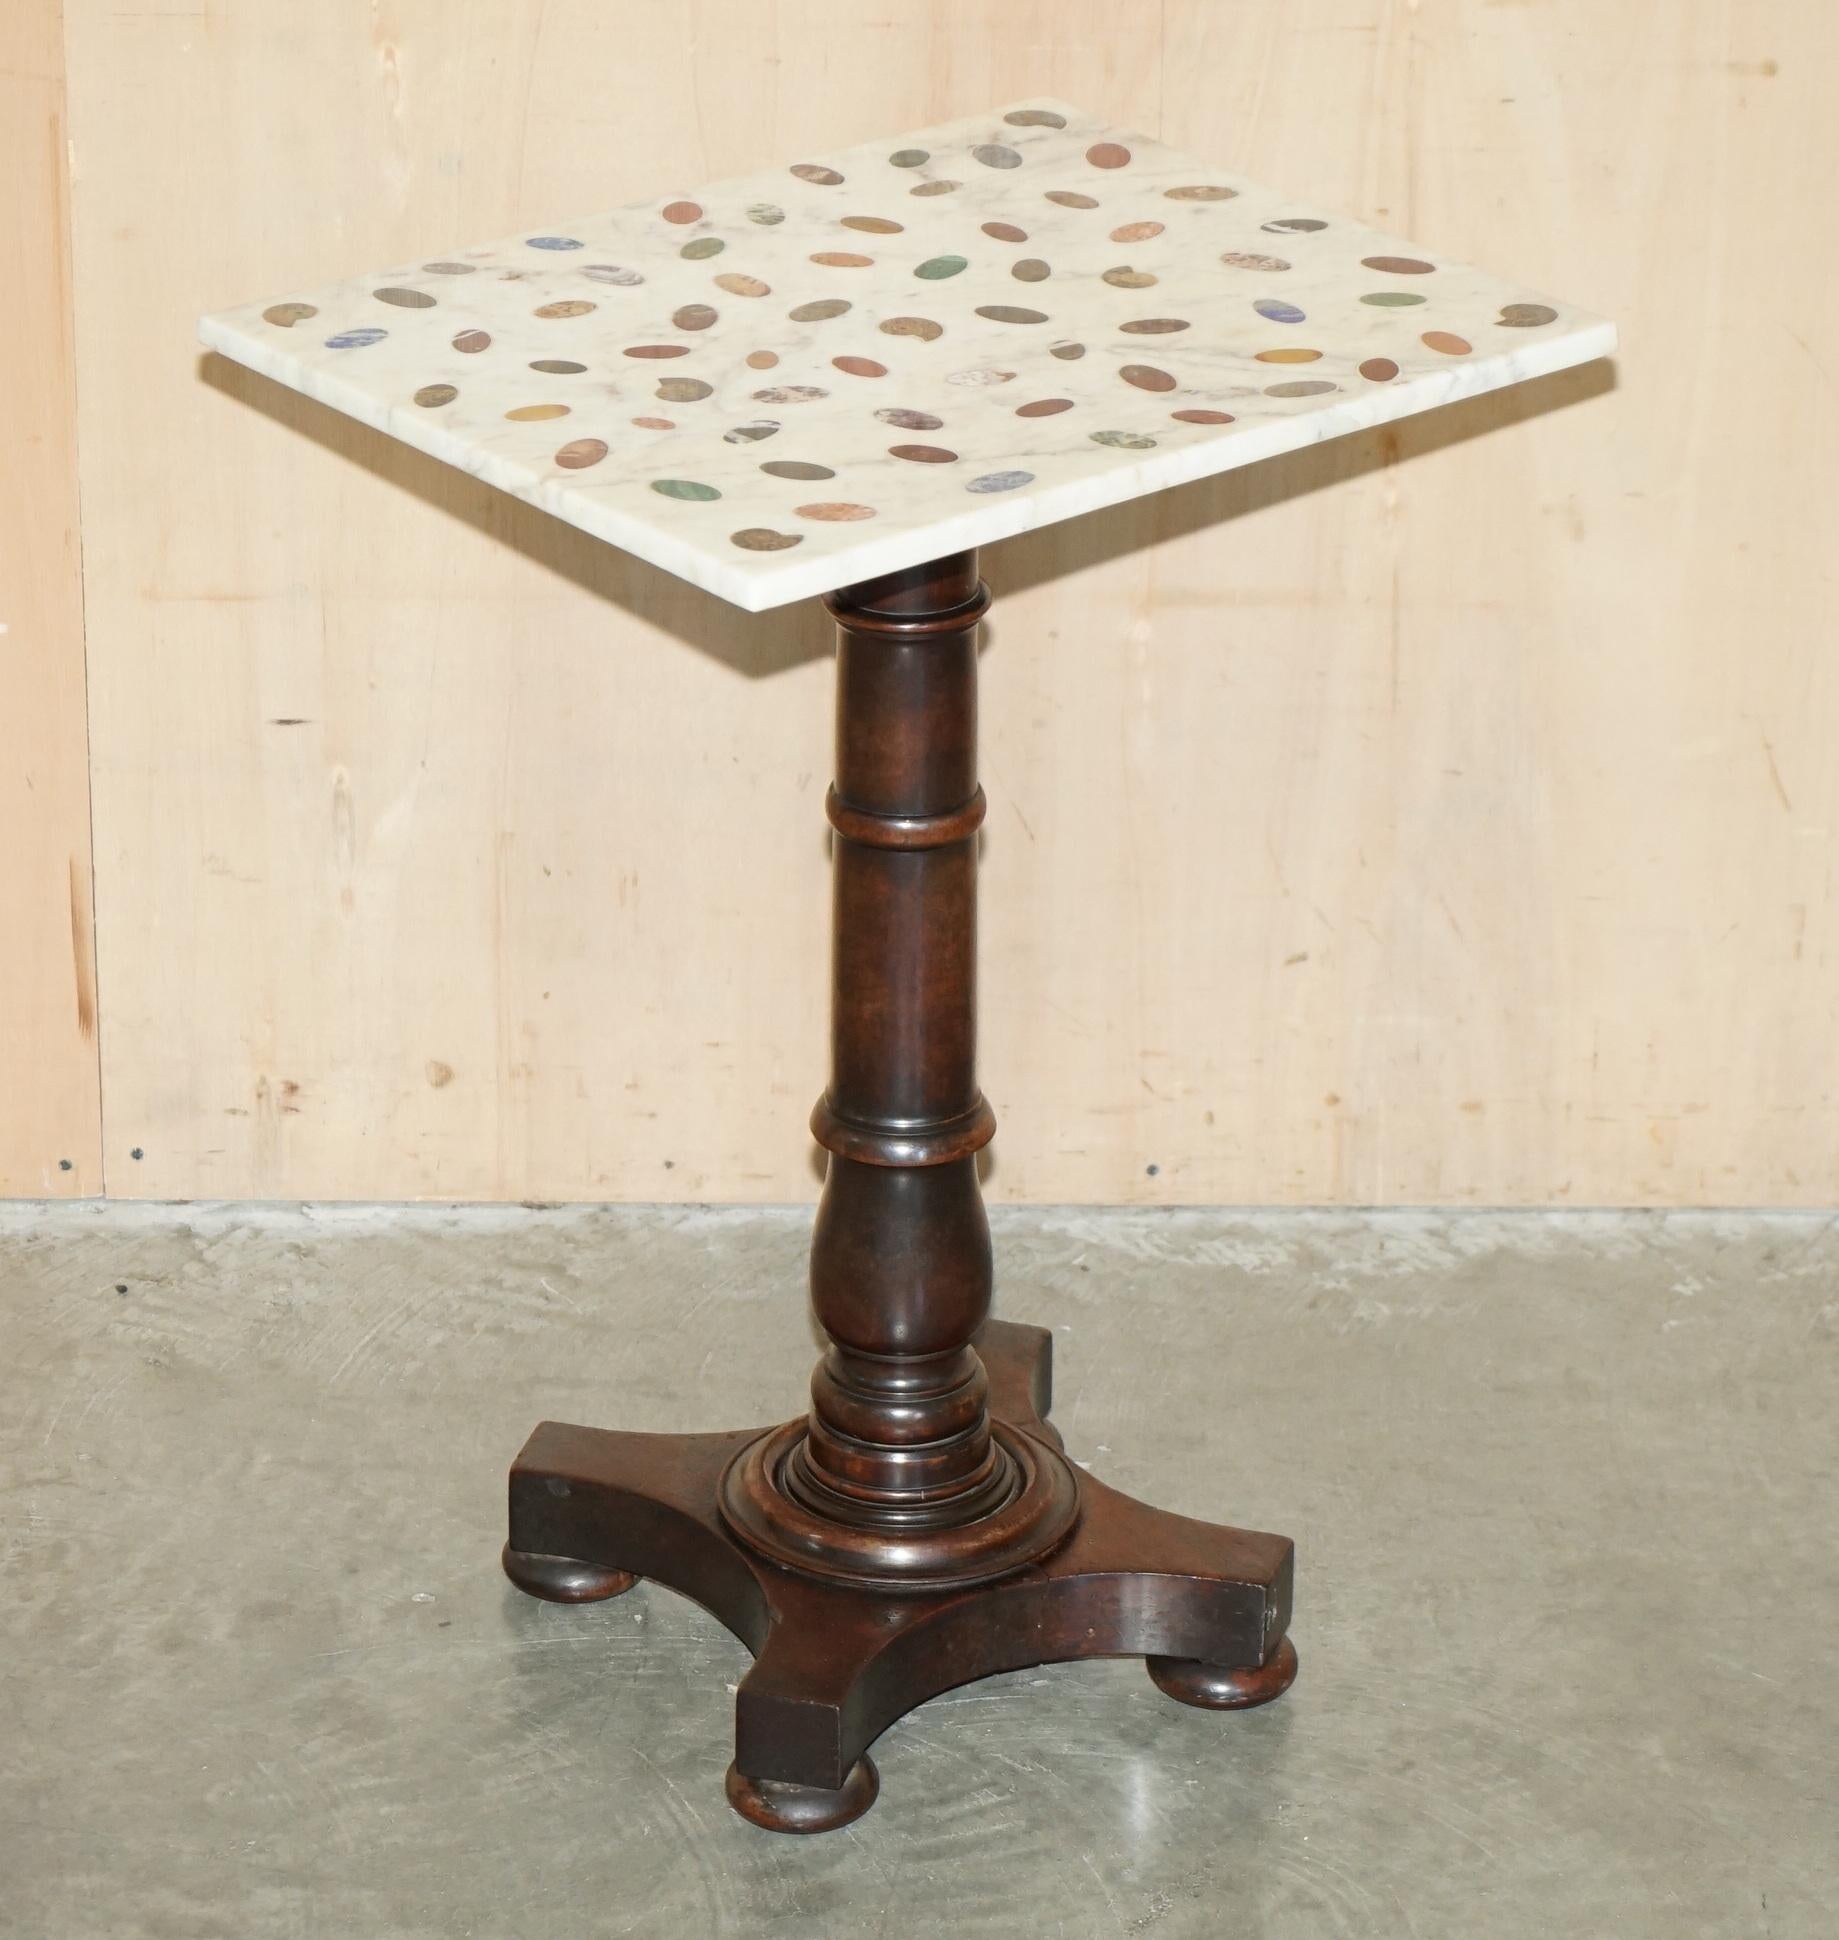 Royal House Antiques

Royal House Antiques is delighted to offer for sale this lovely circa 1830 side end table base with later Victorian, super rare Ammonite Fossil and Specimen Marble top

Please note the delivery fee listed is just a guide, it